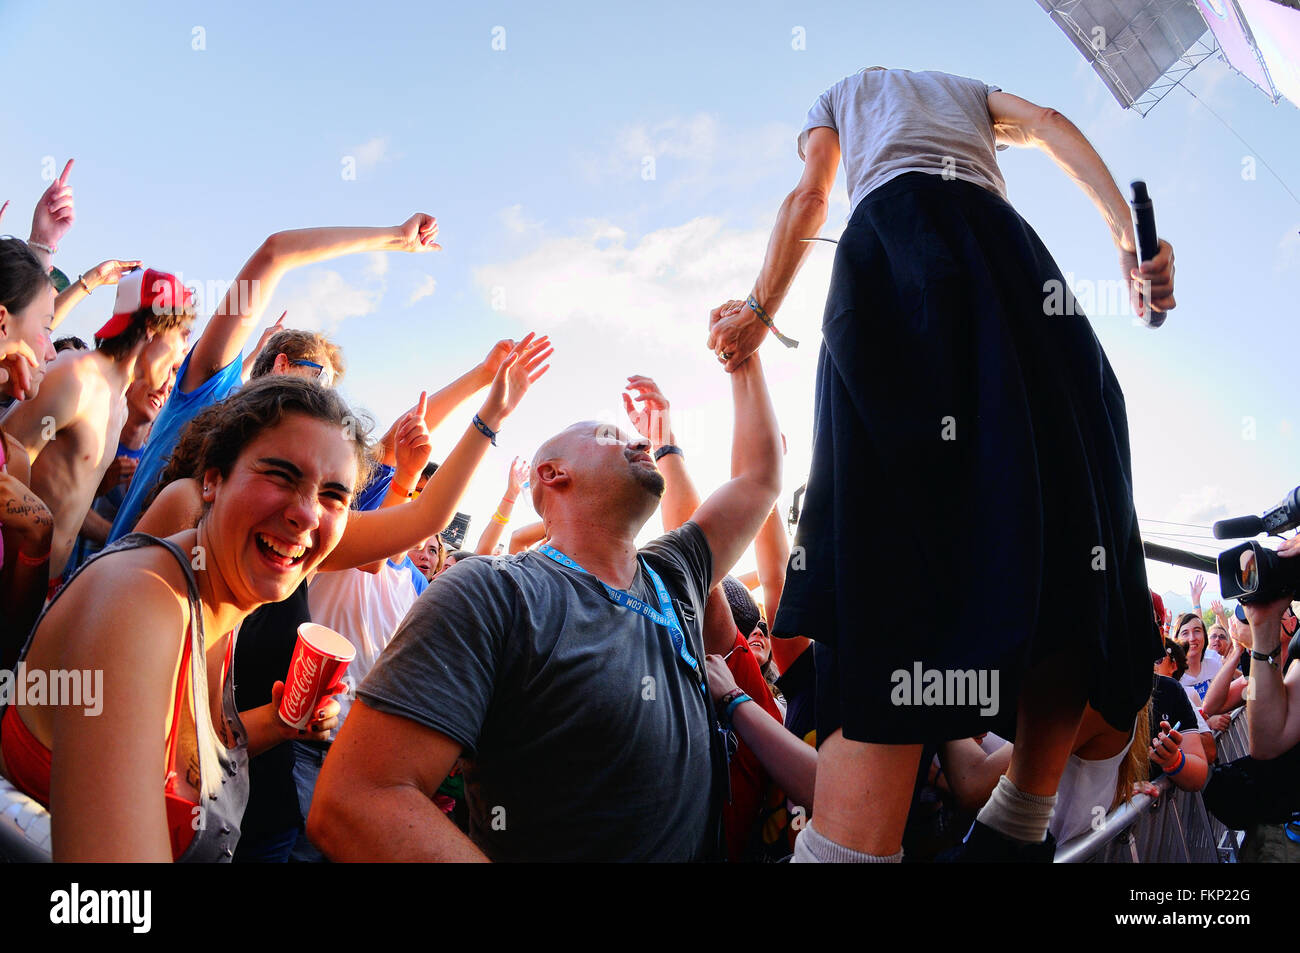 SPAIN - JULY 17: James (band) performance with the crowd at FIB Festival. Stock Photo